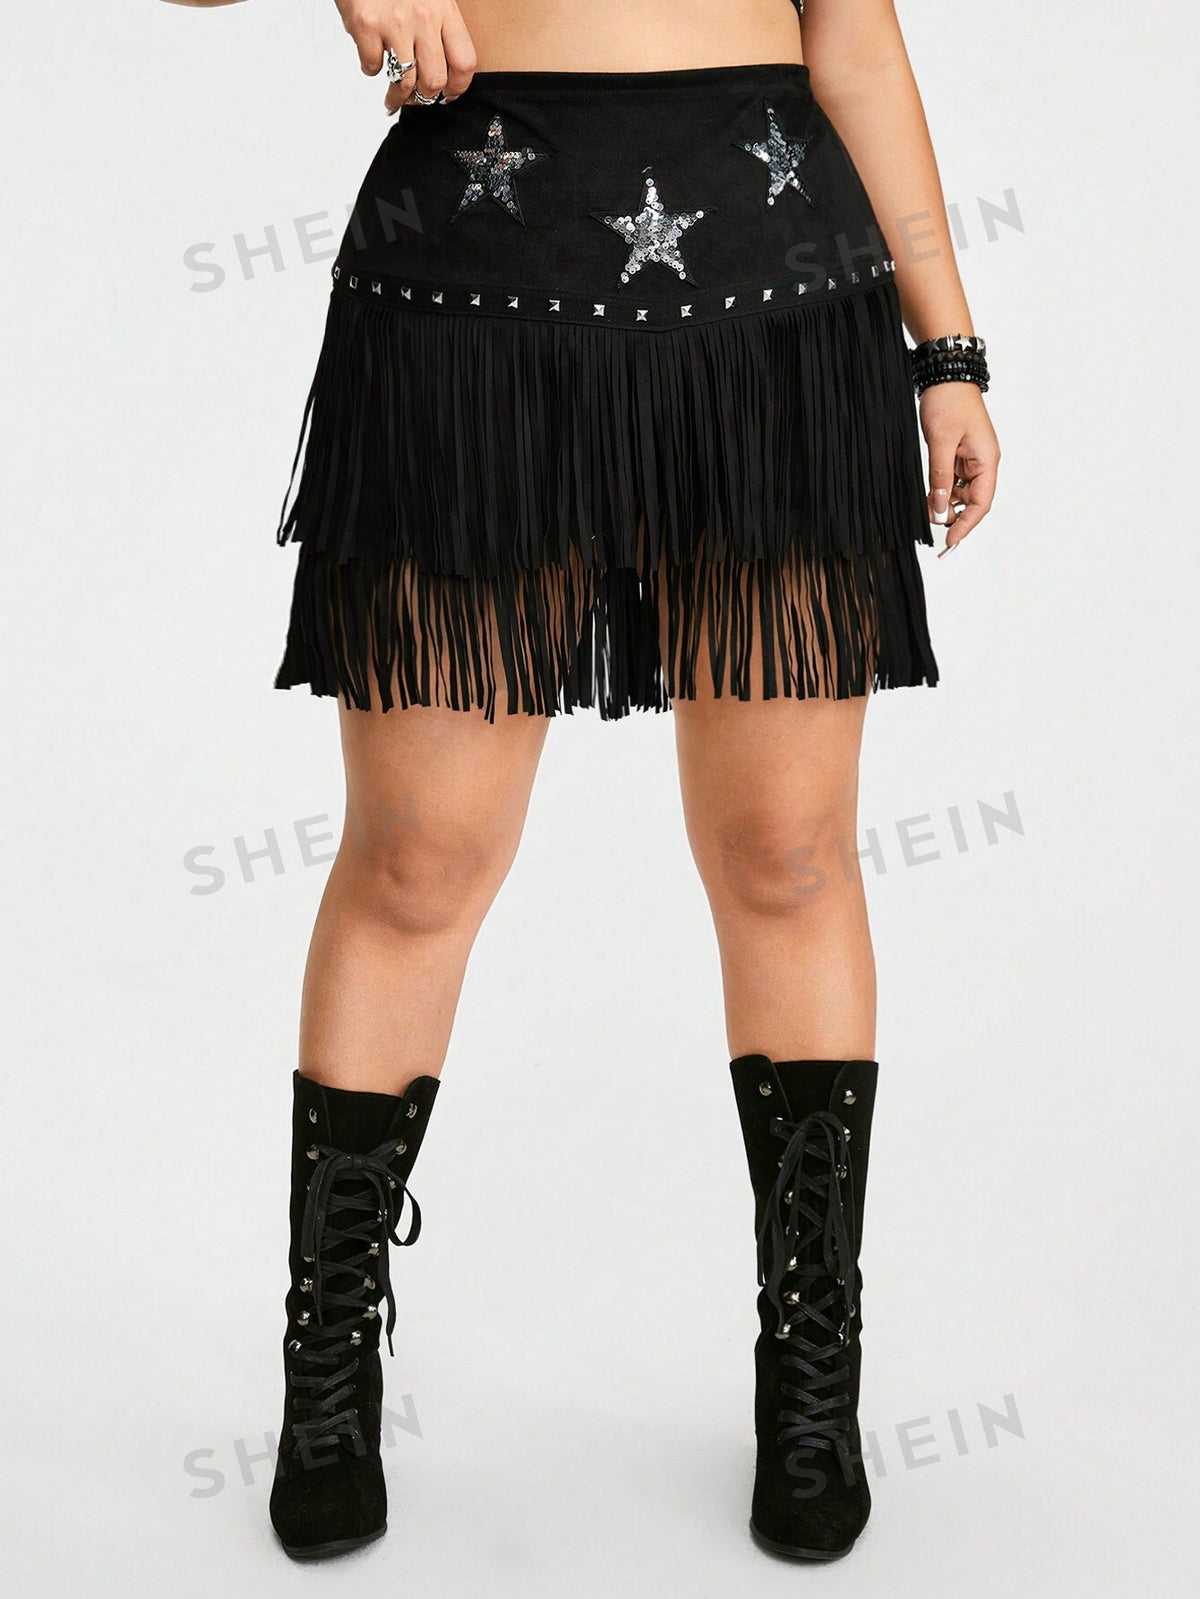 ROMWE Grunge Punk Plus Size Women's Vintage Western Holiday Style Double-Tiered Tassel Hem Shorts With Star & Sequin Ornament